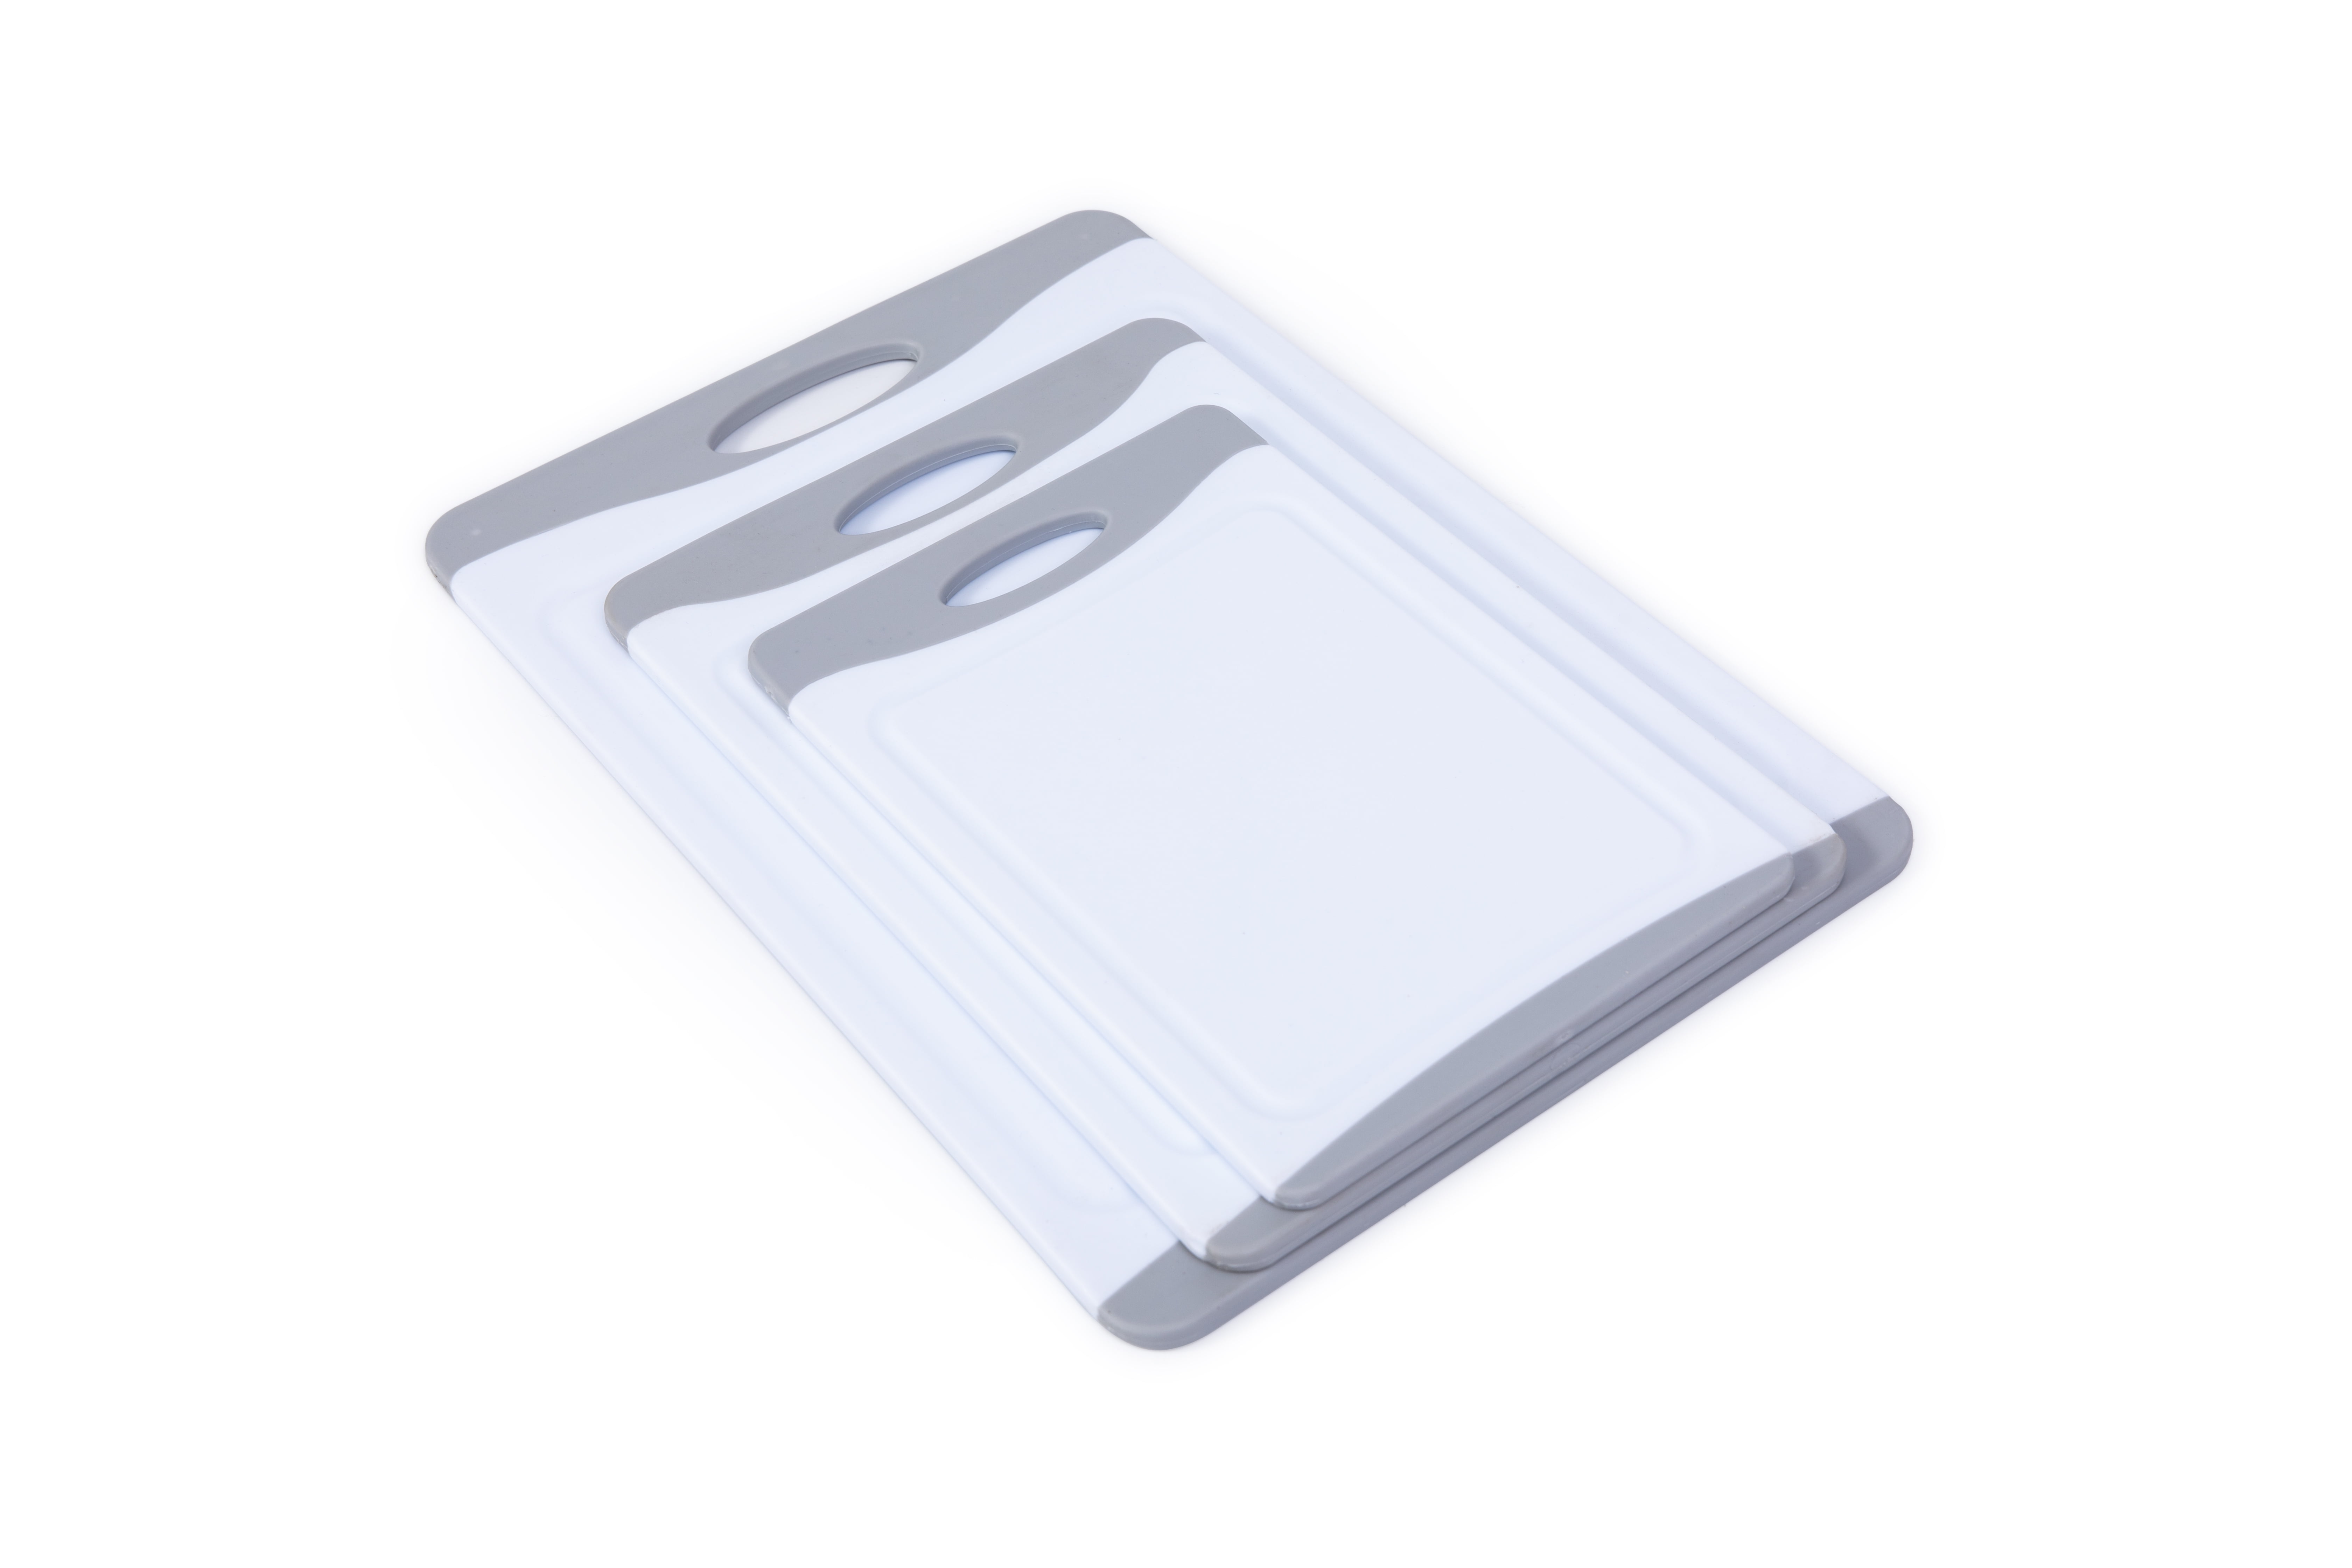  3/4 White Poly Cutting Board - A Cut Above the Rest!